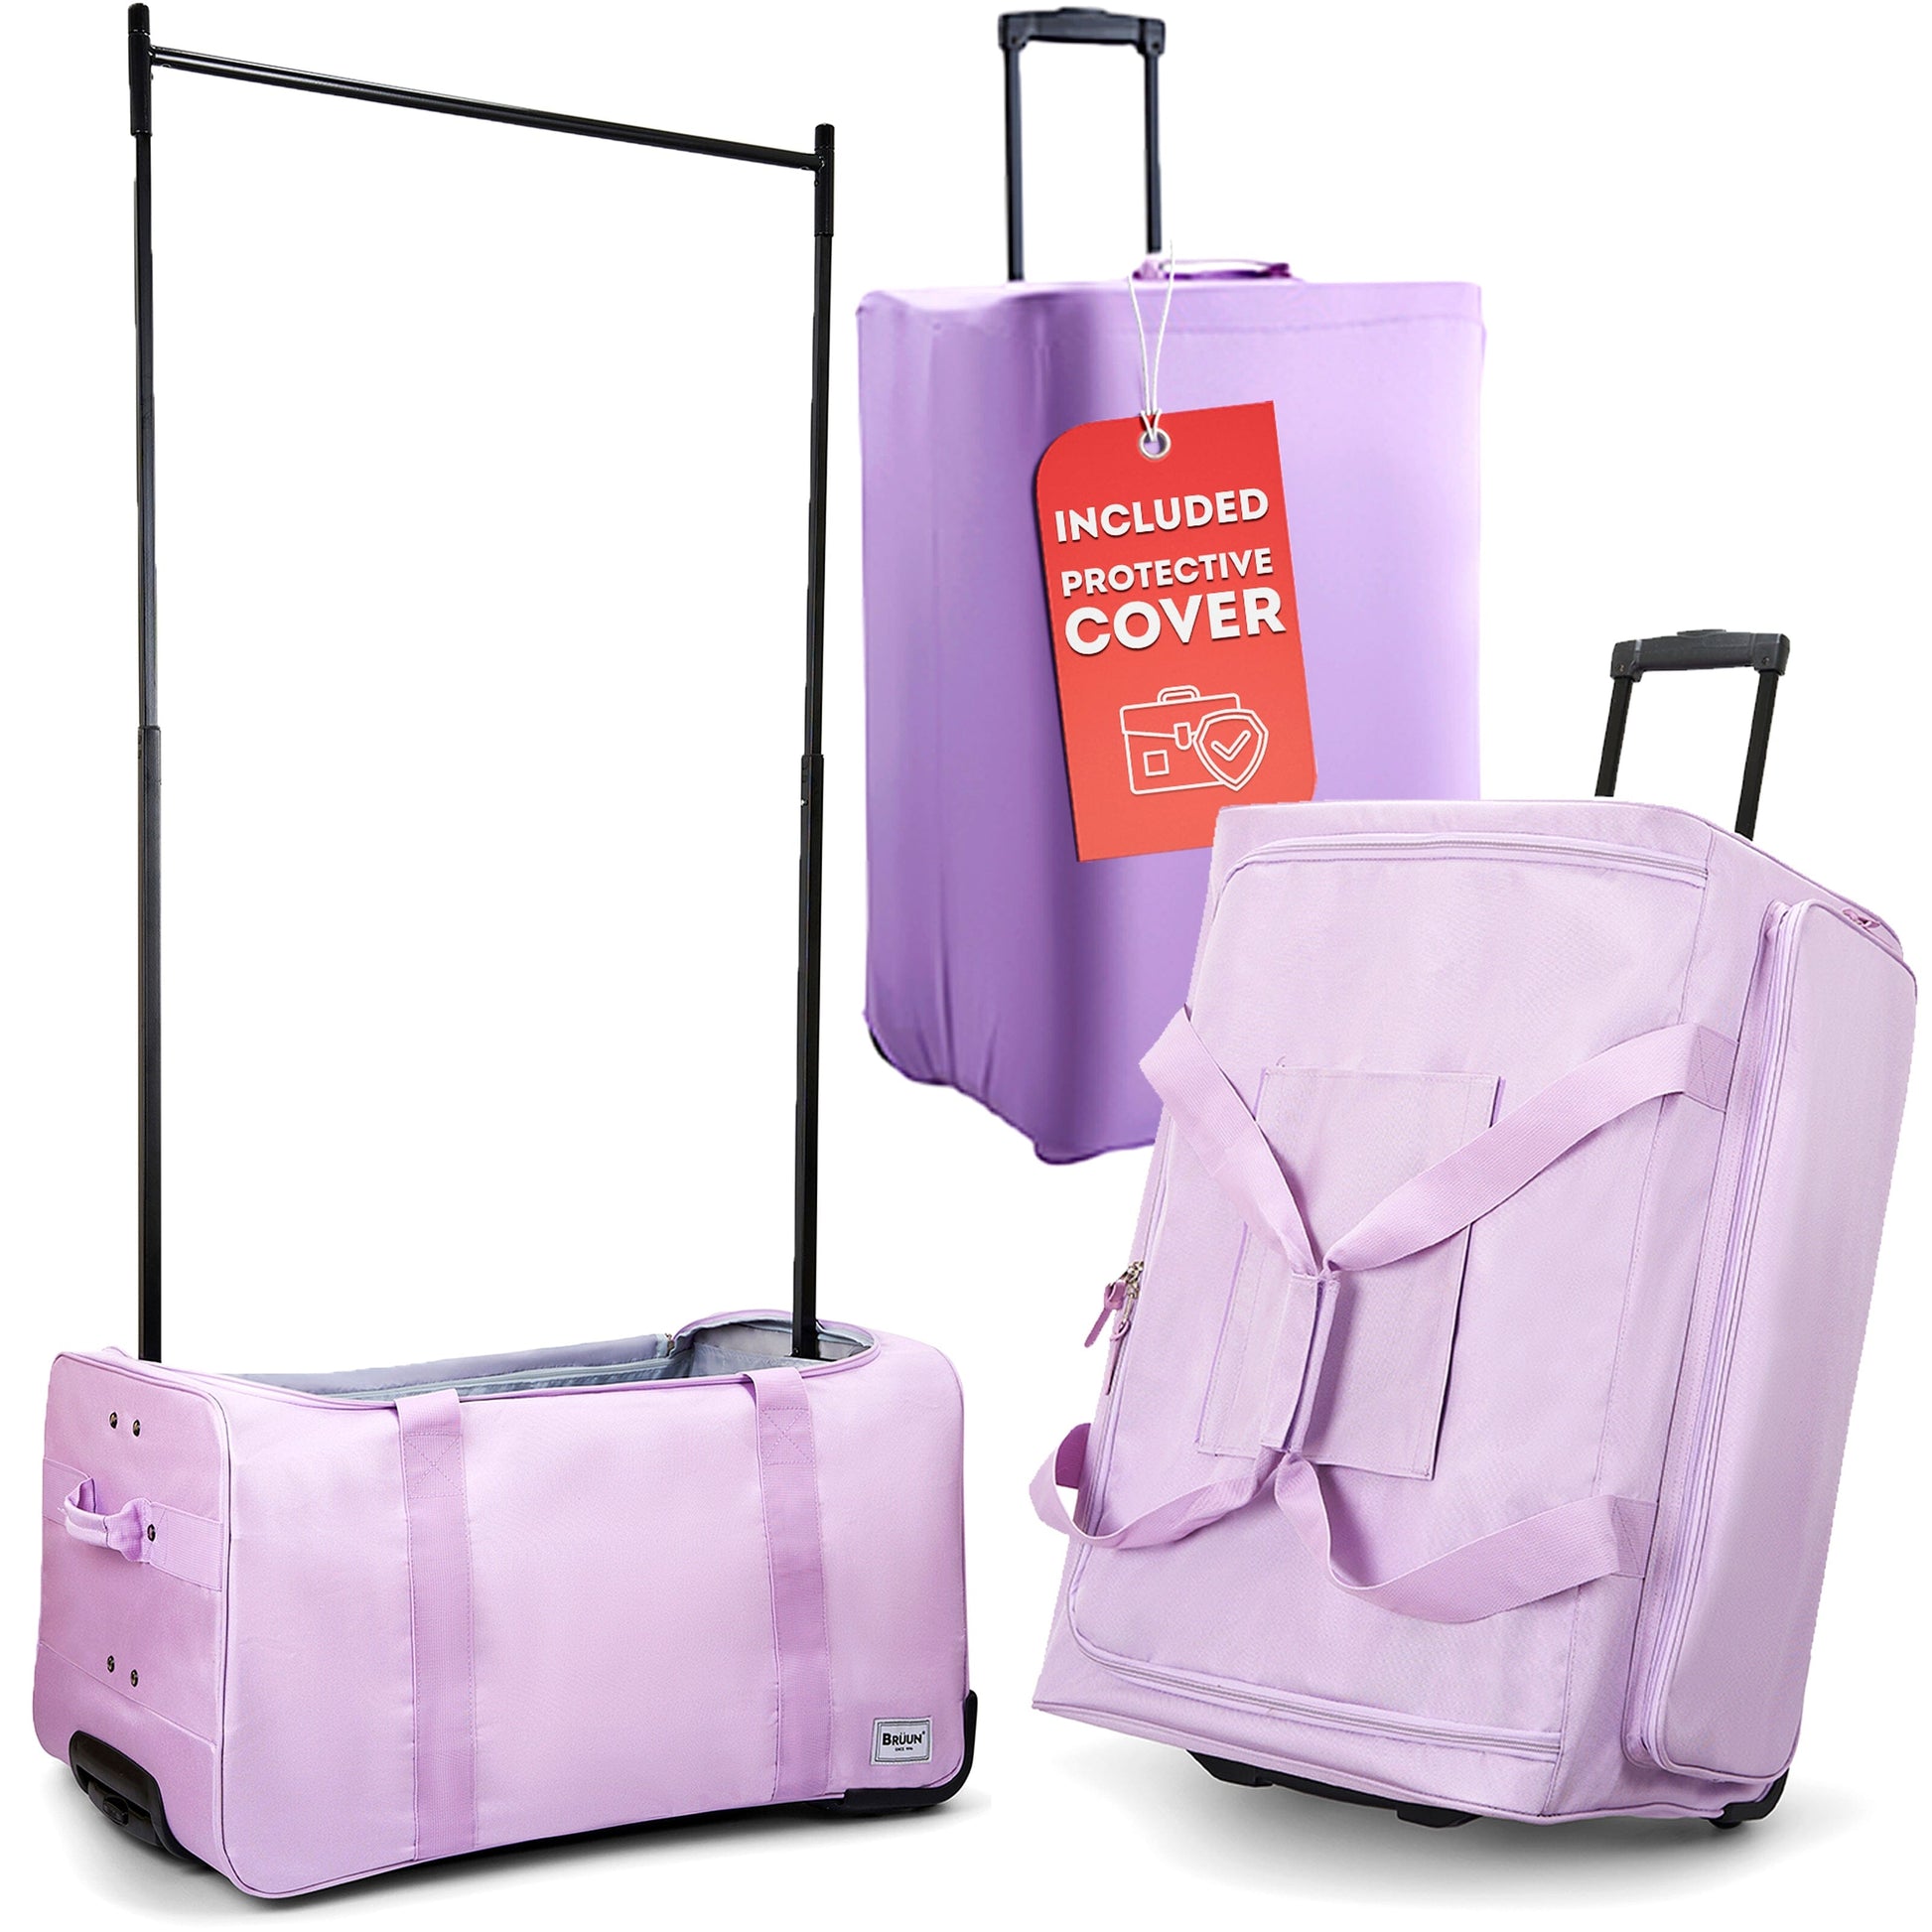 "Limited time Discount on Open Box" A 29" Large Duffel Dance Bags with included Protective Cover | Rolling Carrier for Travel – Specially Designed to Hang Clothes Bruun Beauty Light Violet 